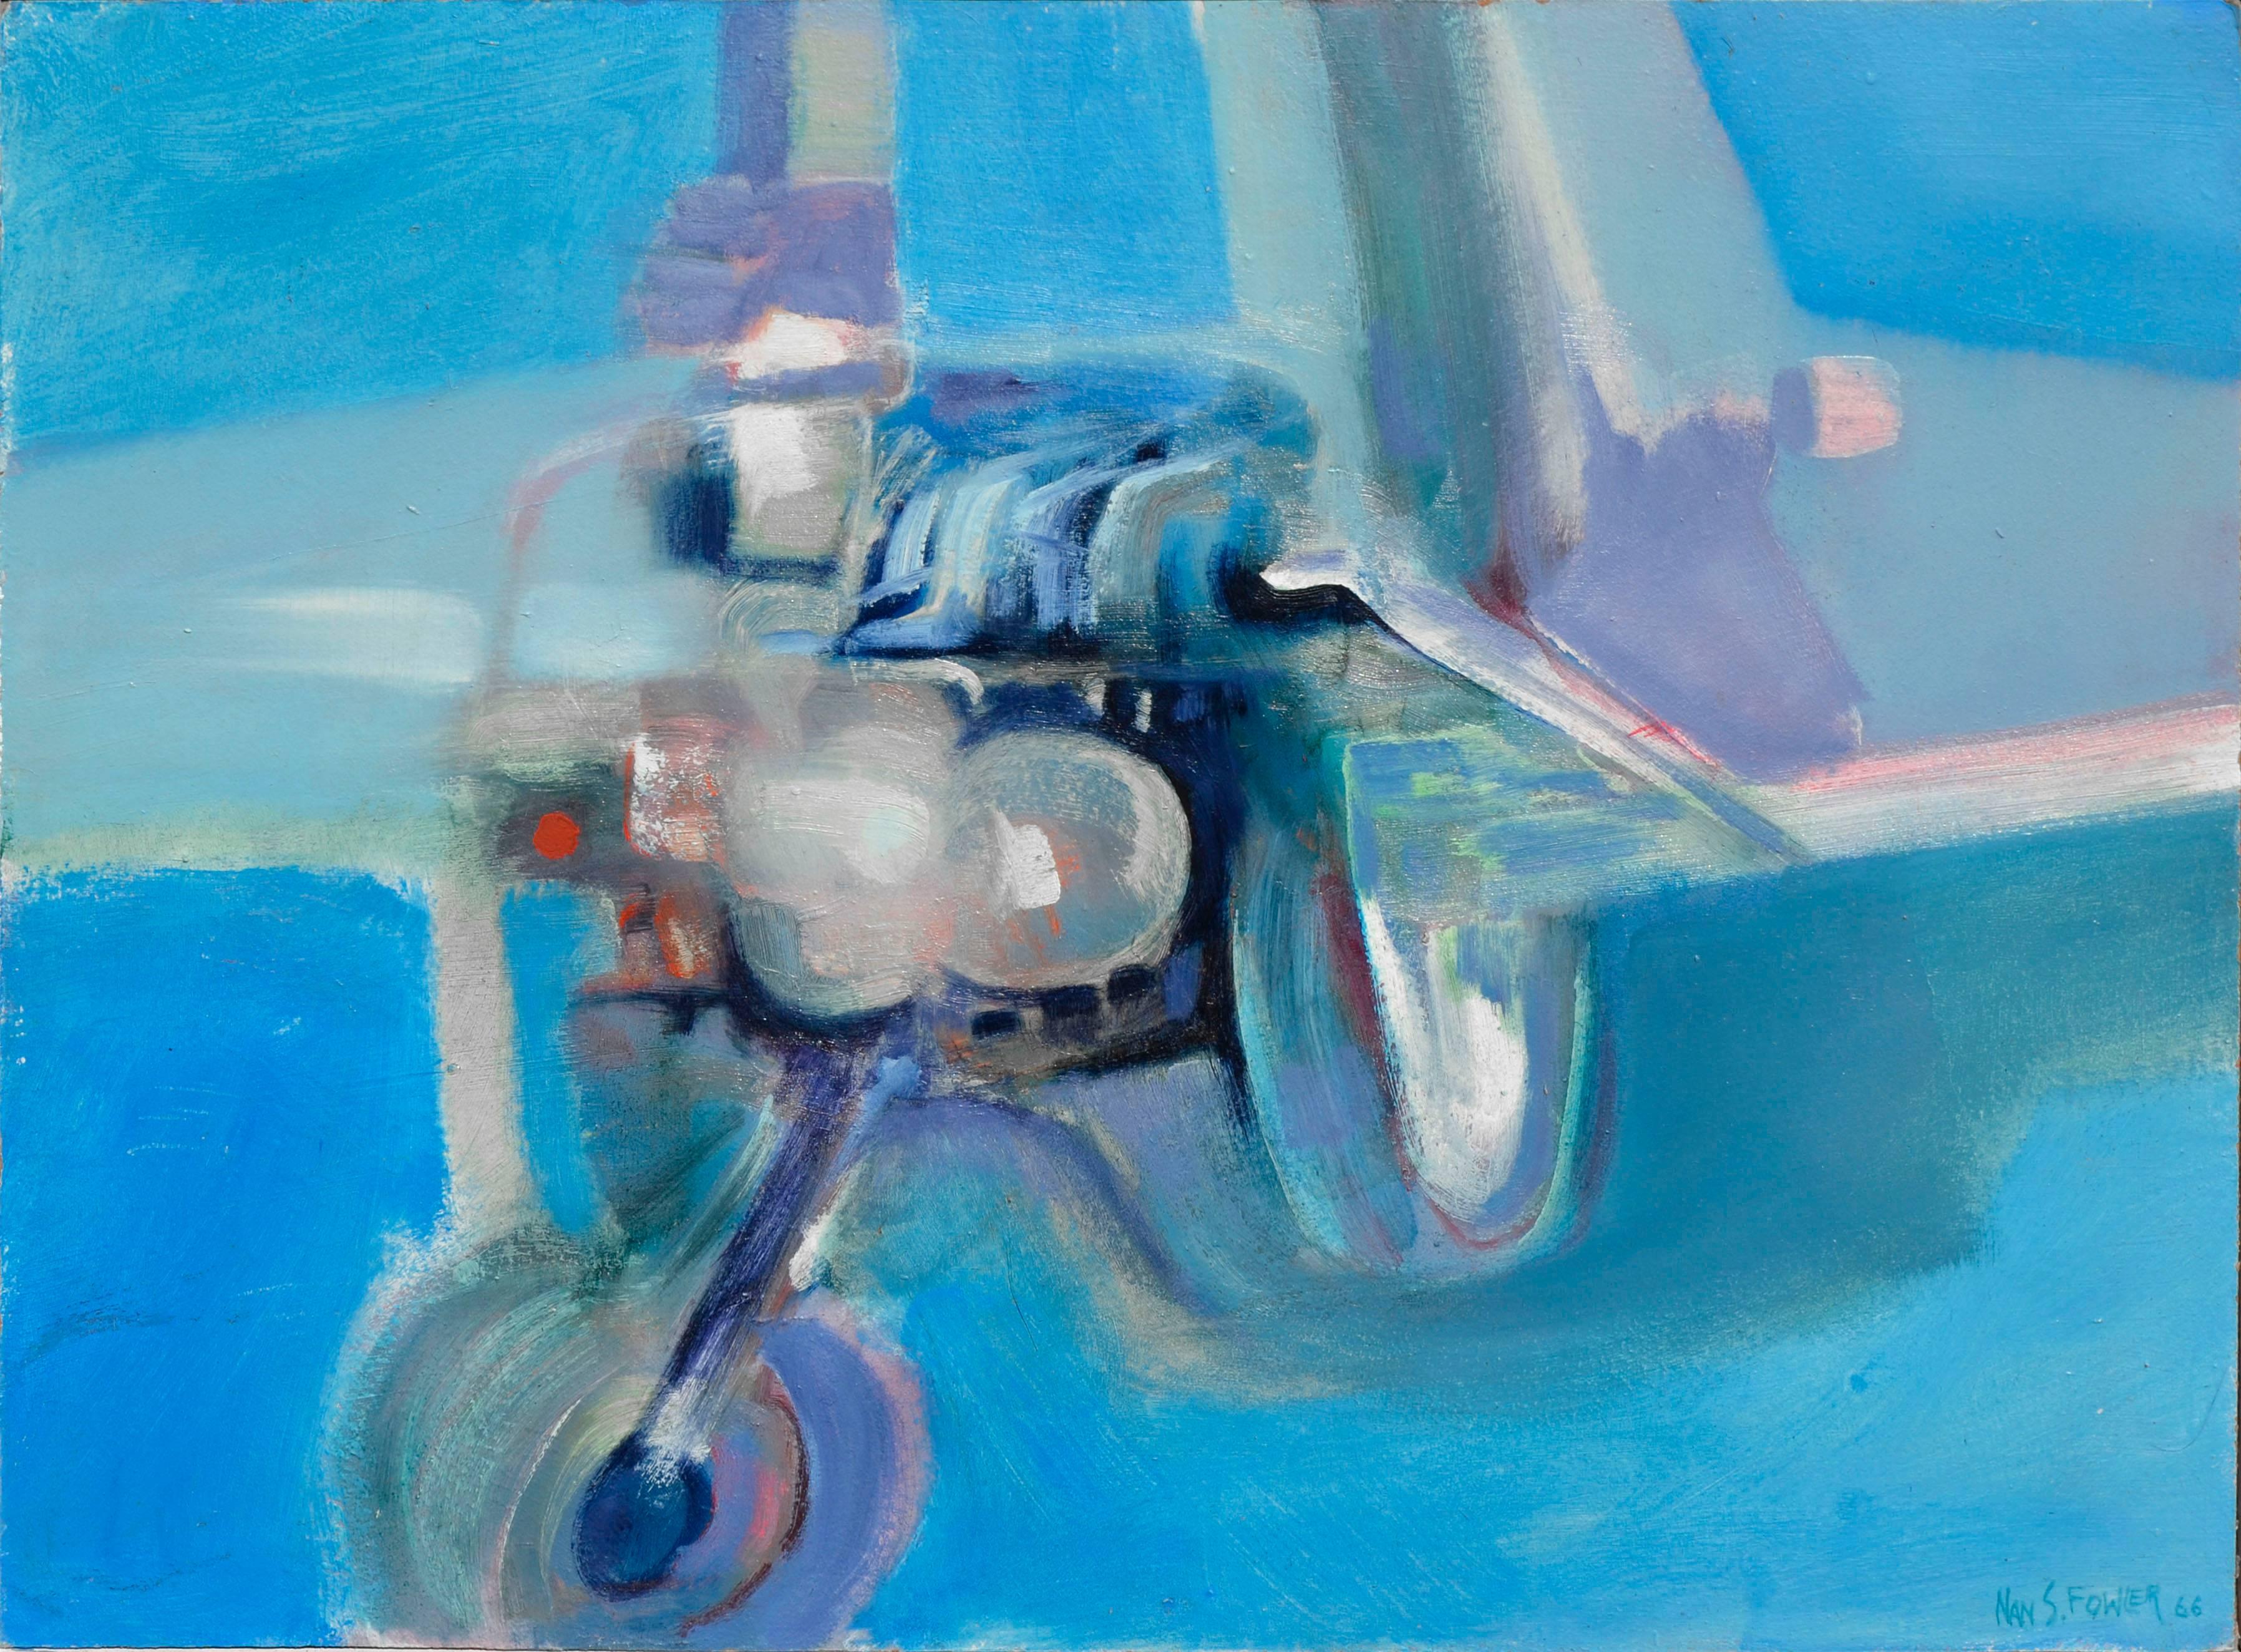 Mid Century Modern Motorcycle Abstract in Blues - Painting by Nan Street Fowler